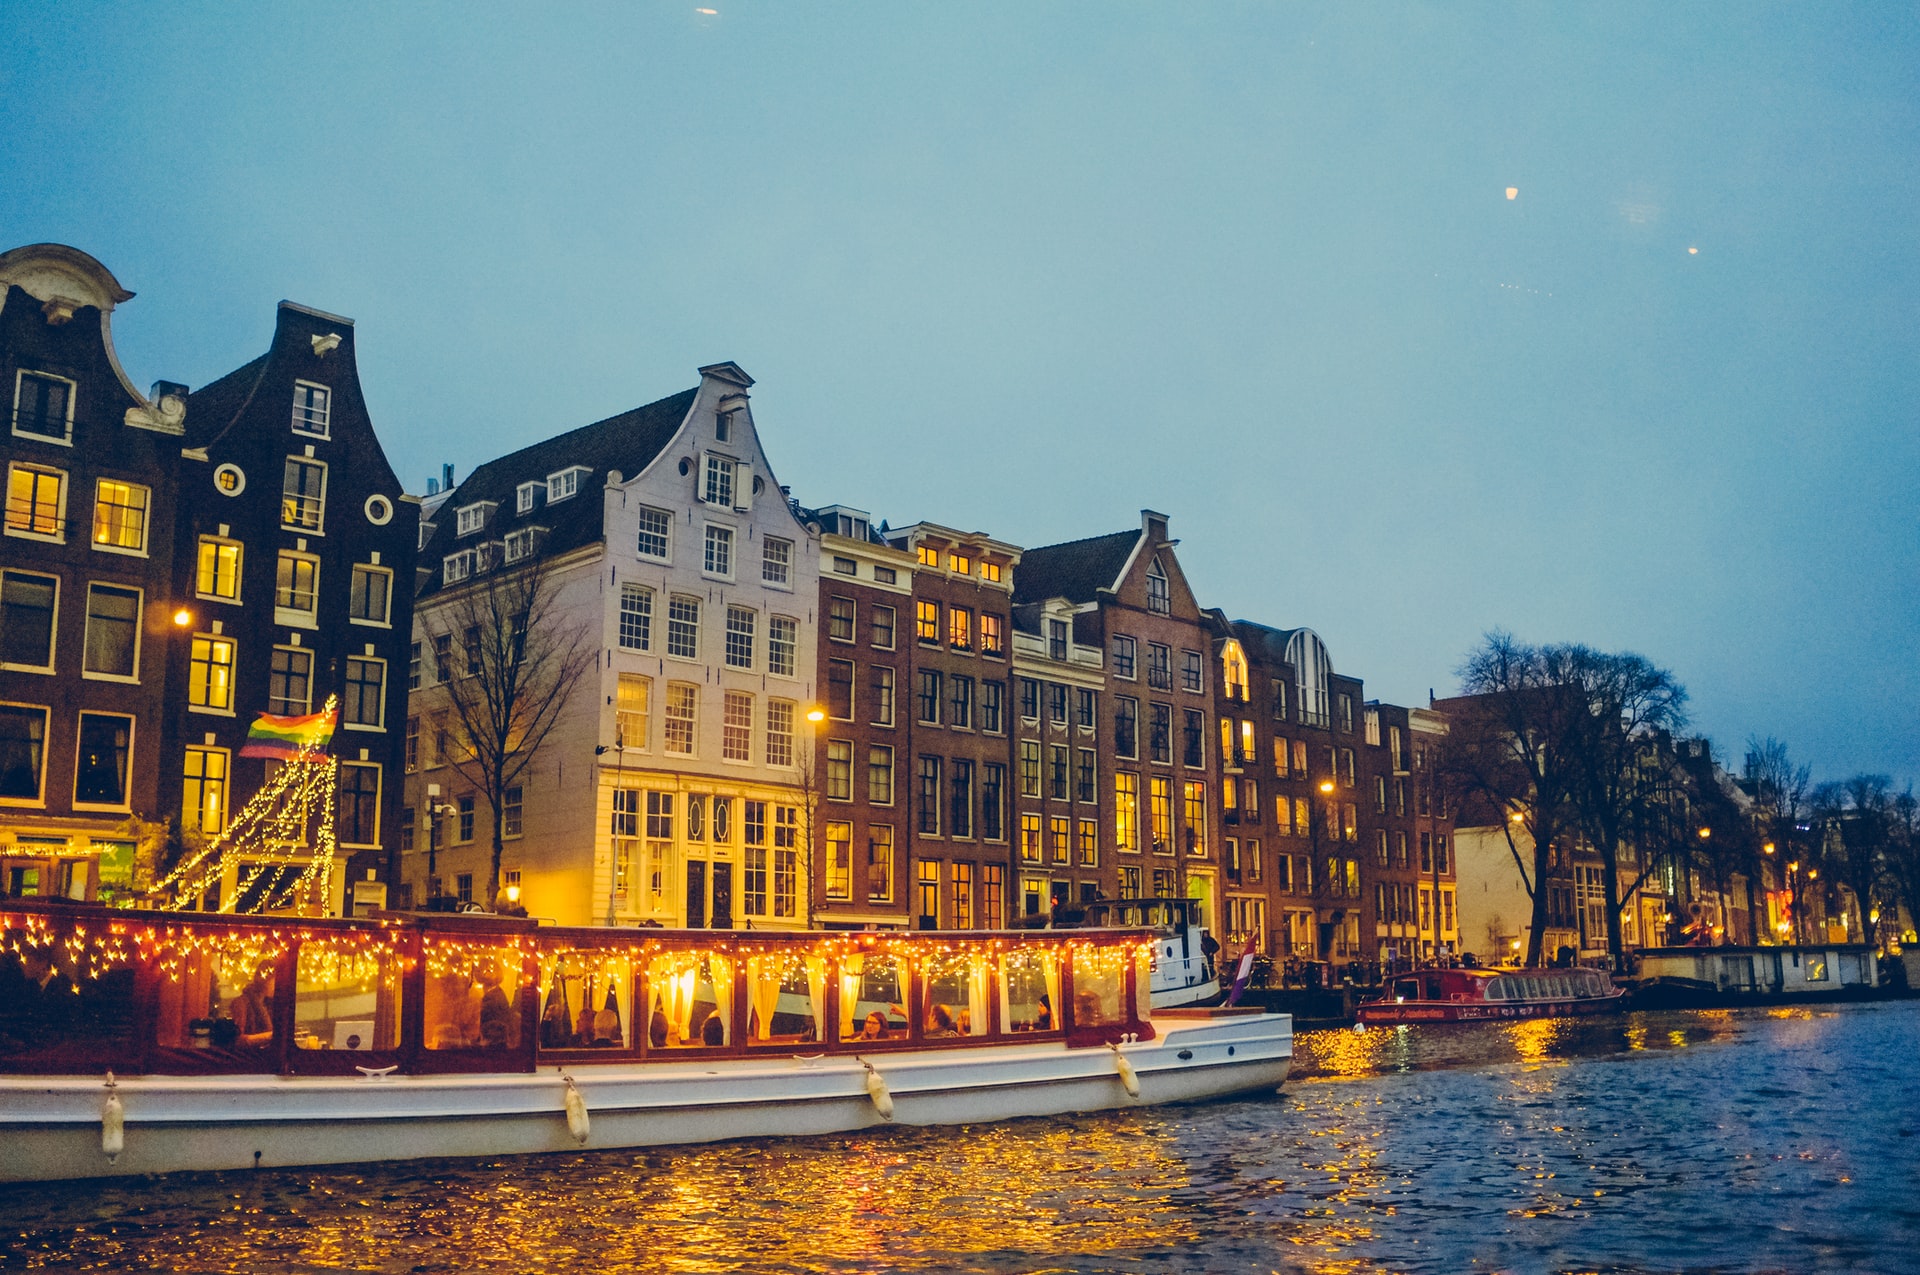 <p>This cruise goes through the beautiful canals of Amsterdam starting at Anne Frank's house and is considered the best travel experience in the world. A combination of history, romanticism, and exclusivity.</p> <p>Image: Unsplash - Savio Felix</p>